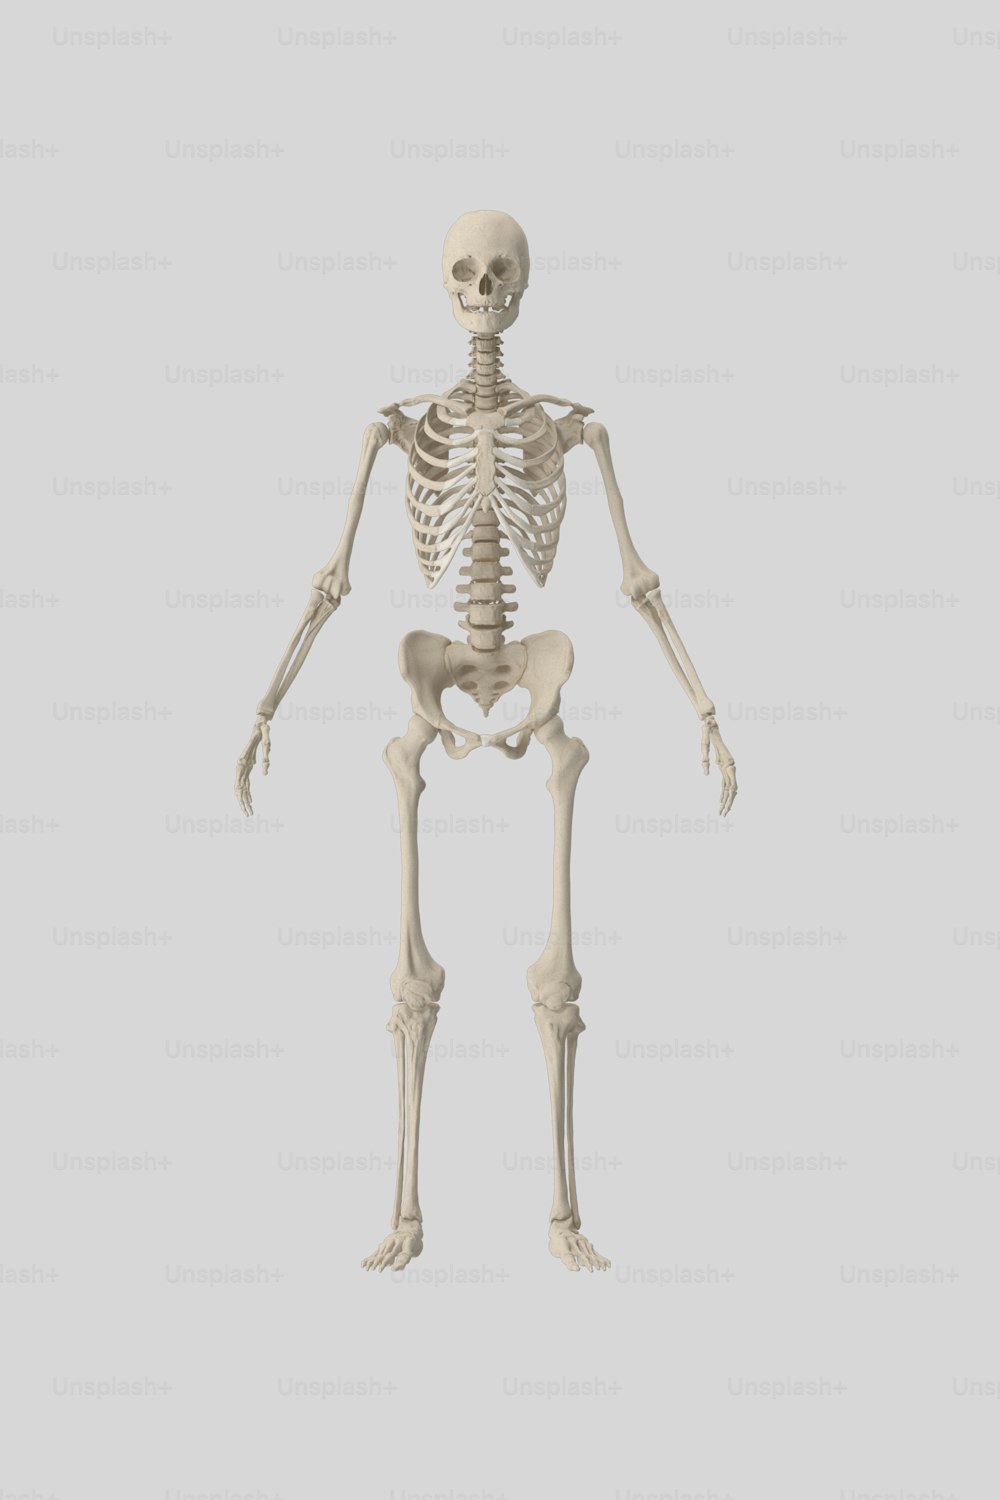 a human skeleton is shown in this image